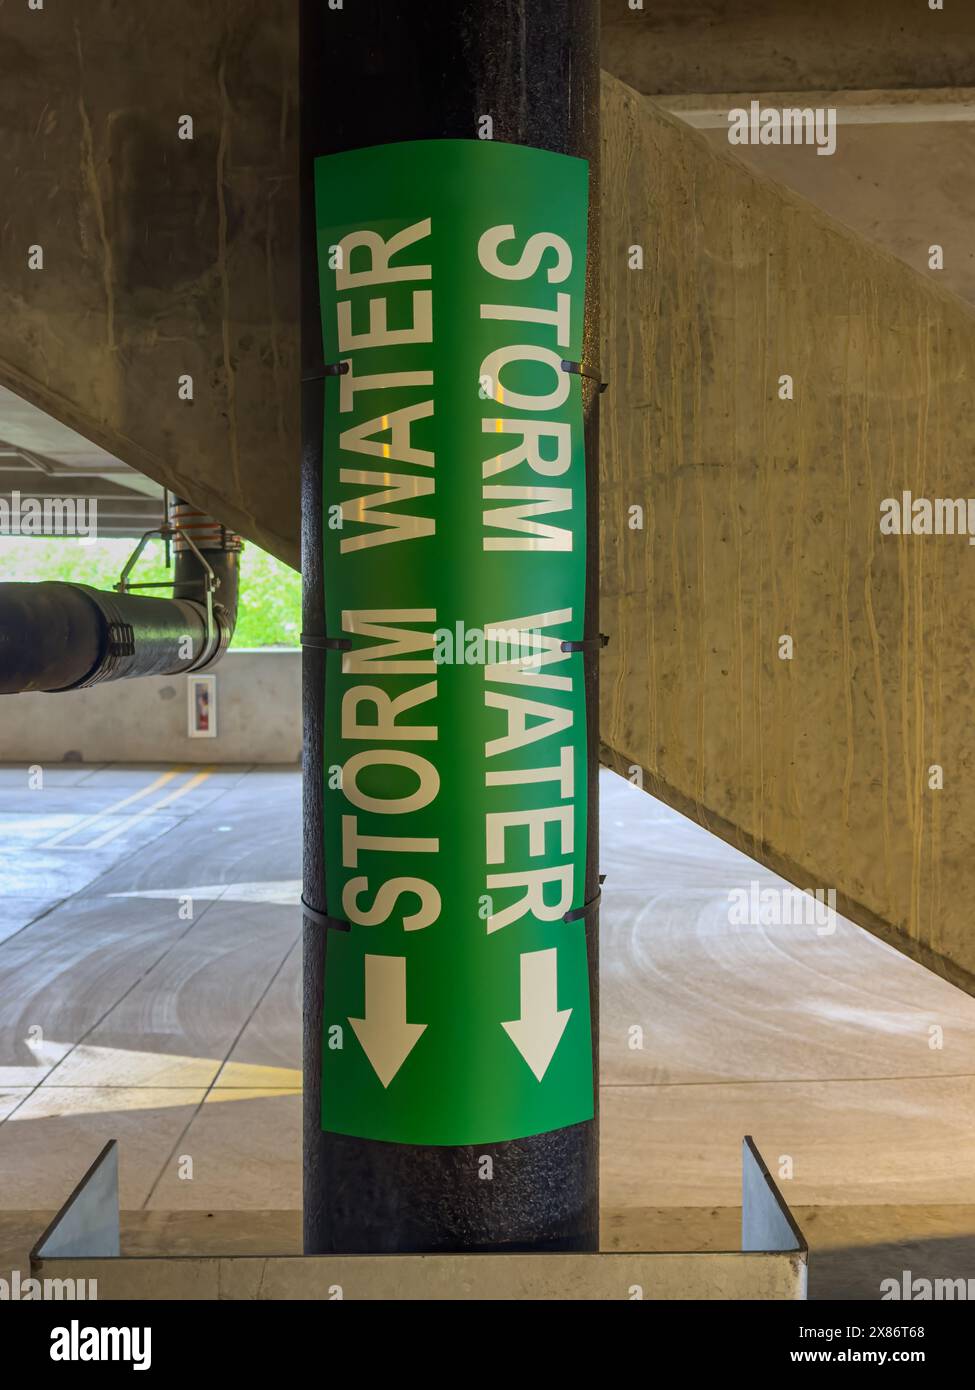 Closeup view of a metal pipe labeled storm water within a concrete parking garage, structure. Stock Photo